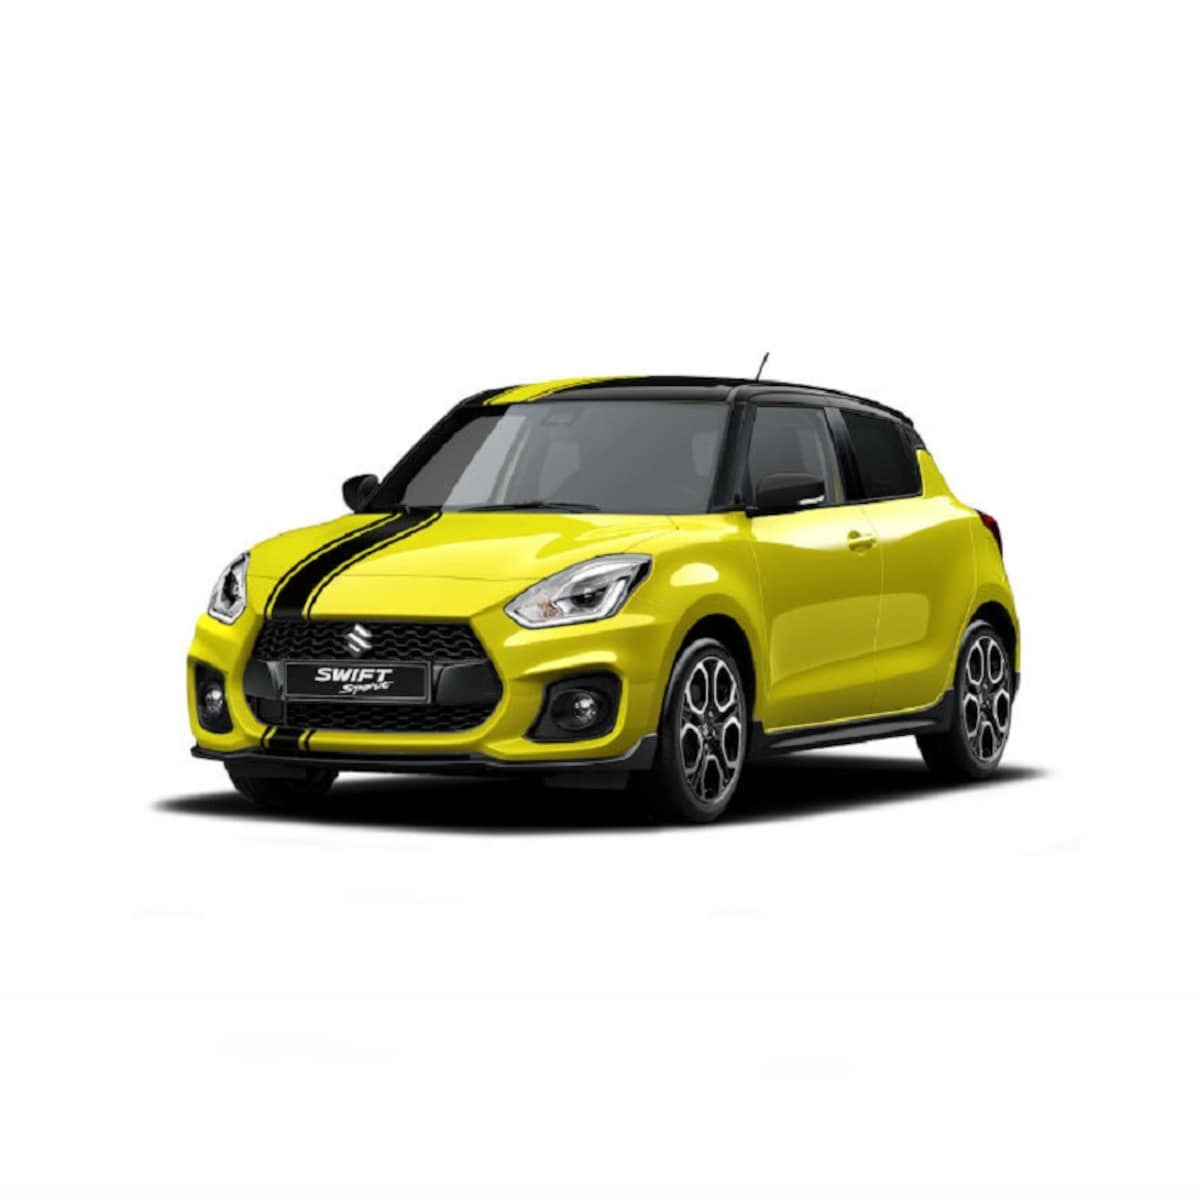 2018 Suzuki Swift Sport BeeRacing Limited Edition Launched